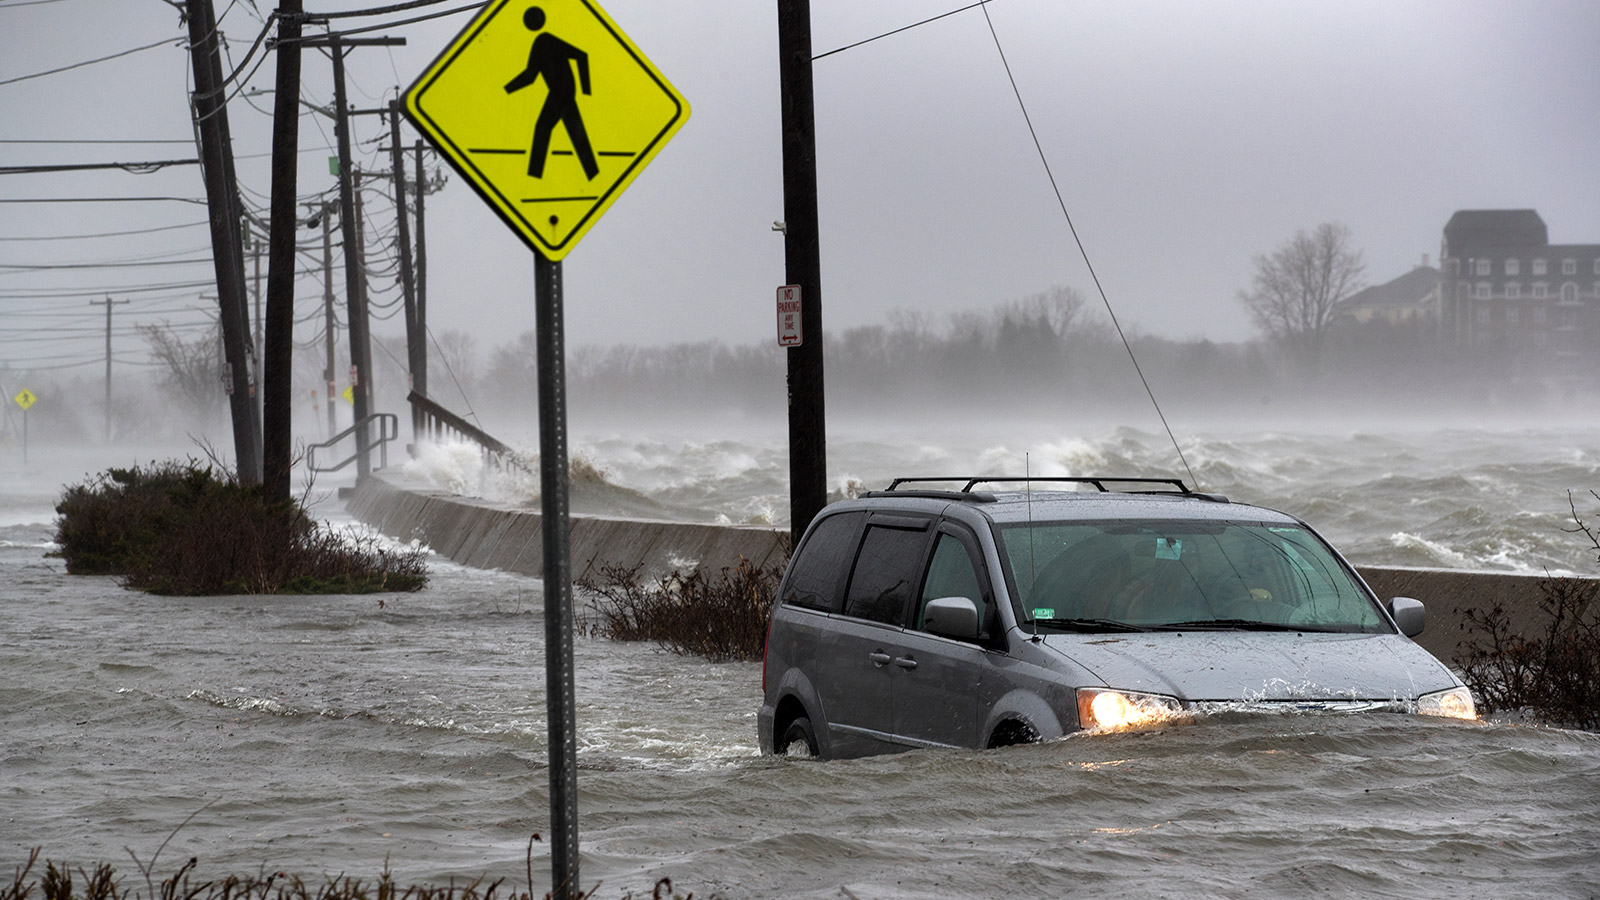 A vehicle navigates a flooded street in the Squantum section of Quincy, MA.